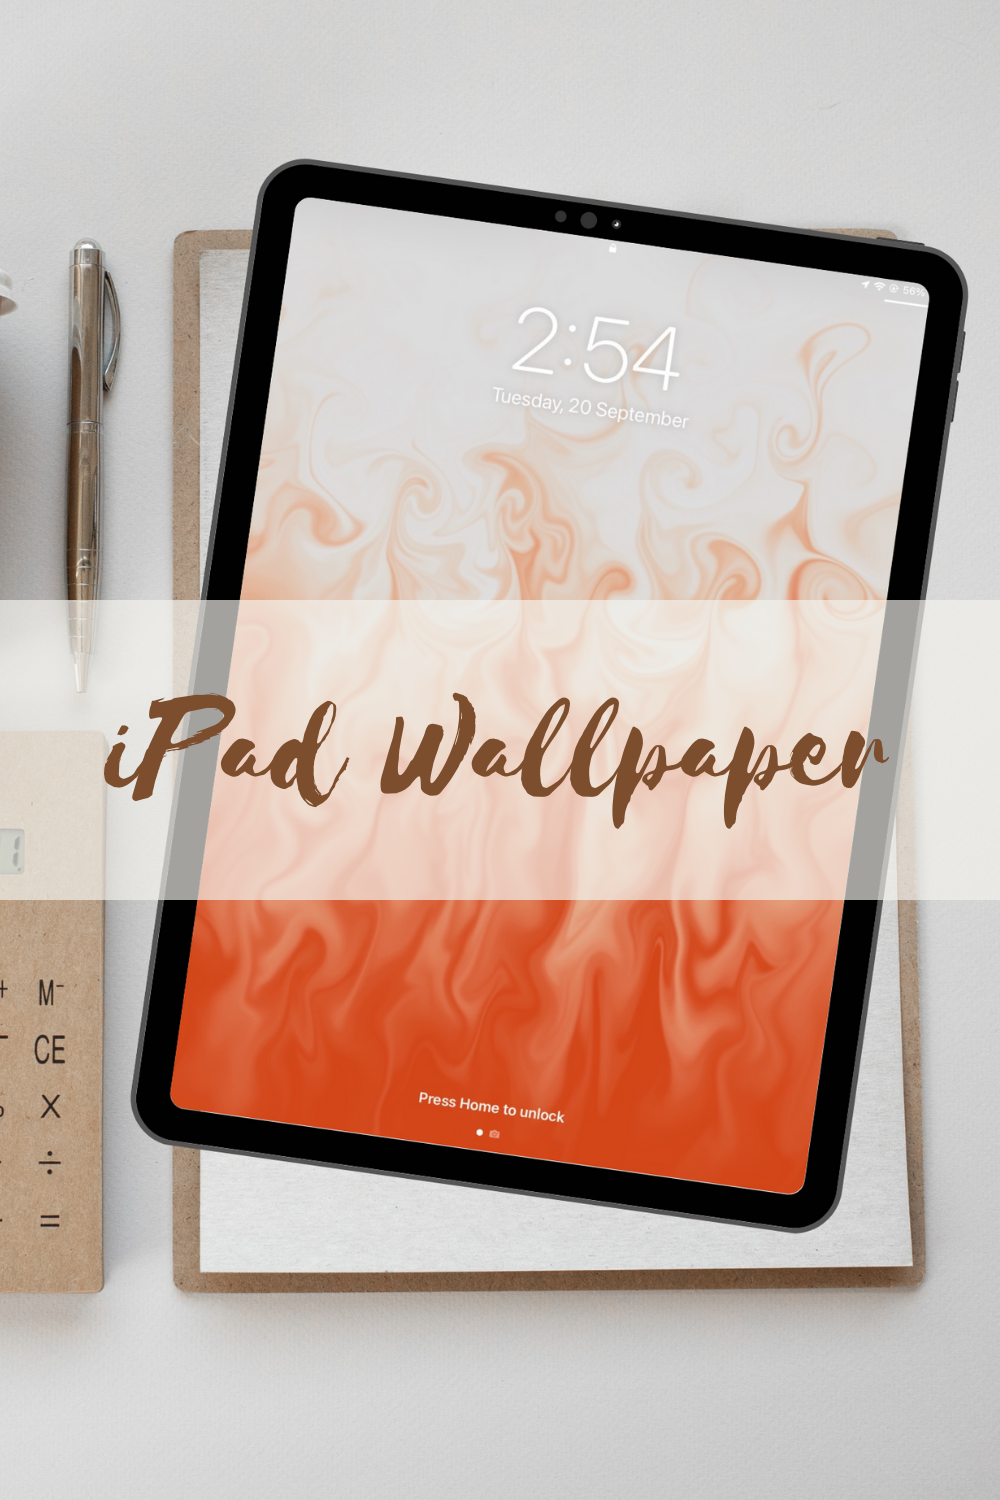 Aesthetic iPad wallpaper is perfect for your iPad beauty. Change your iPad look with these iPad wallpapers and have a happy iPad and happy you. A change of wallpaper gives a change of mood, inspiration, and newness.Perfect for us tech buddies who spend a 